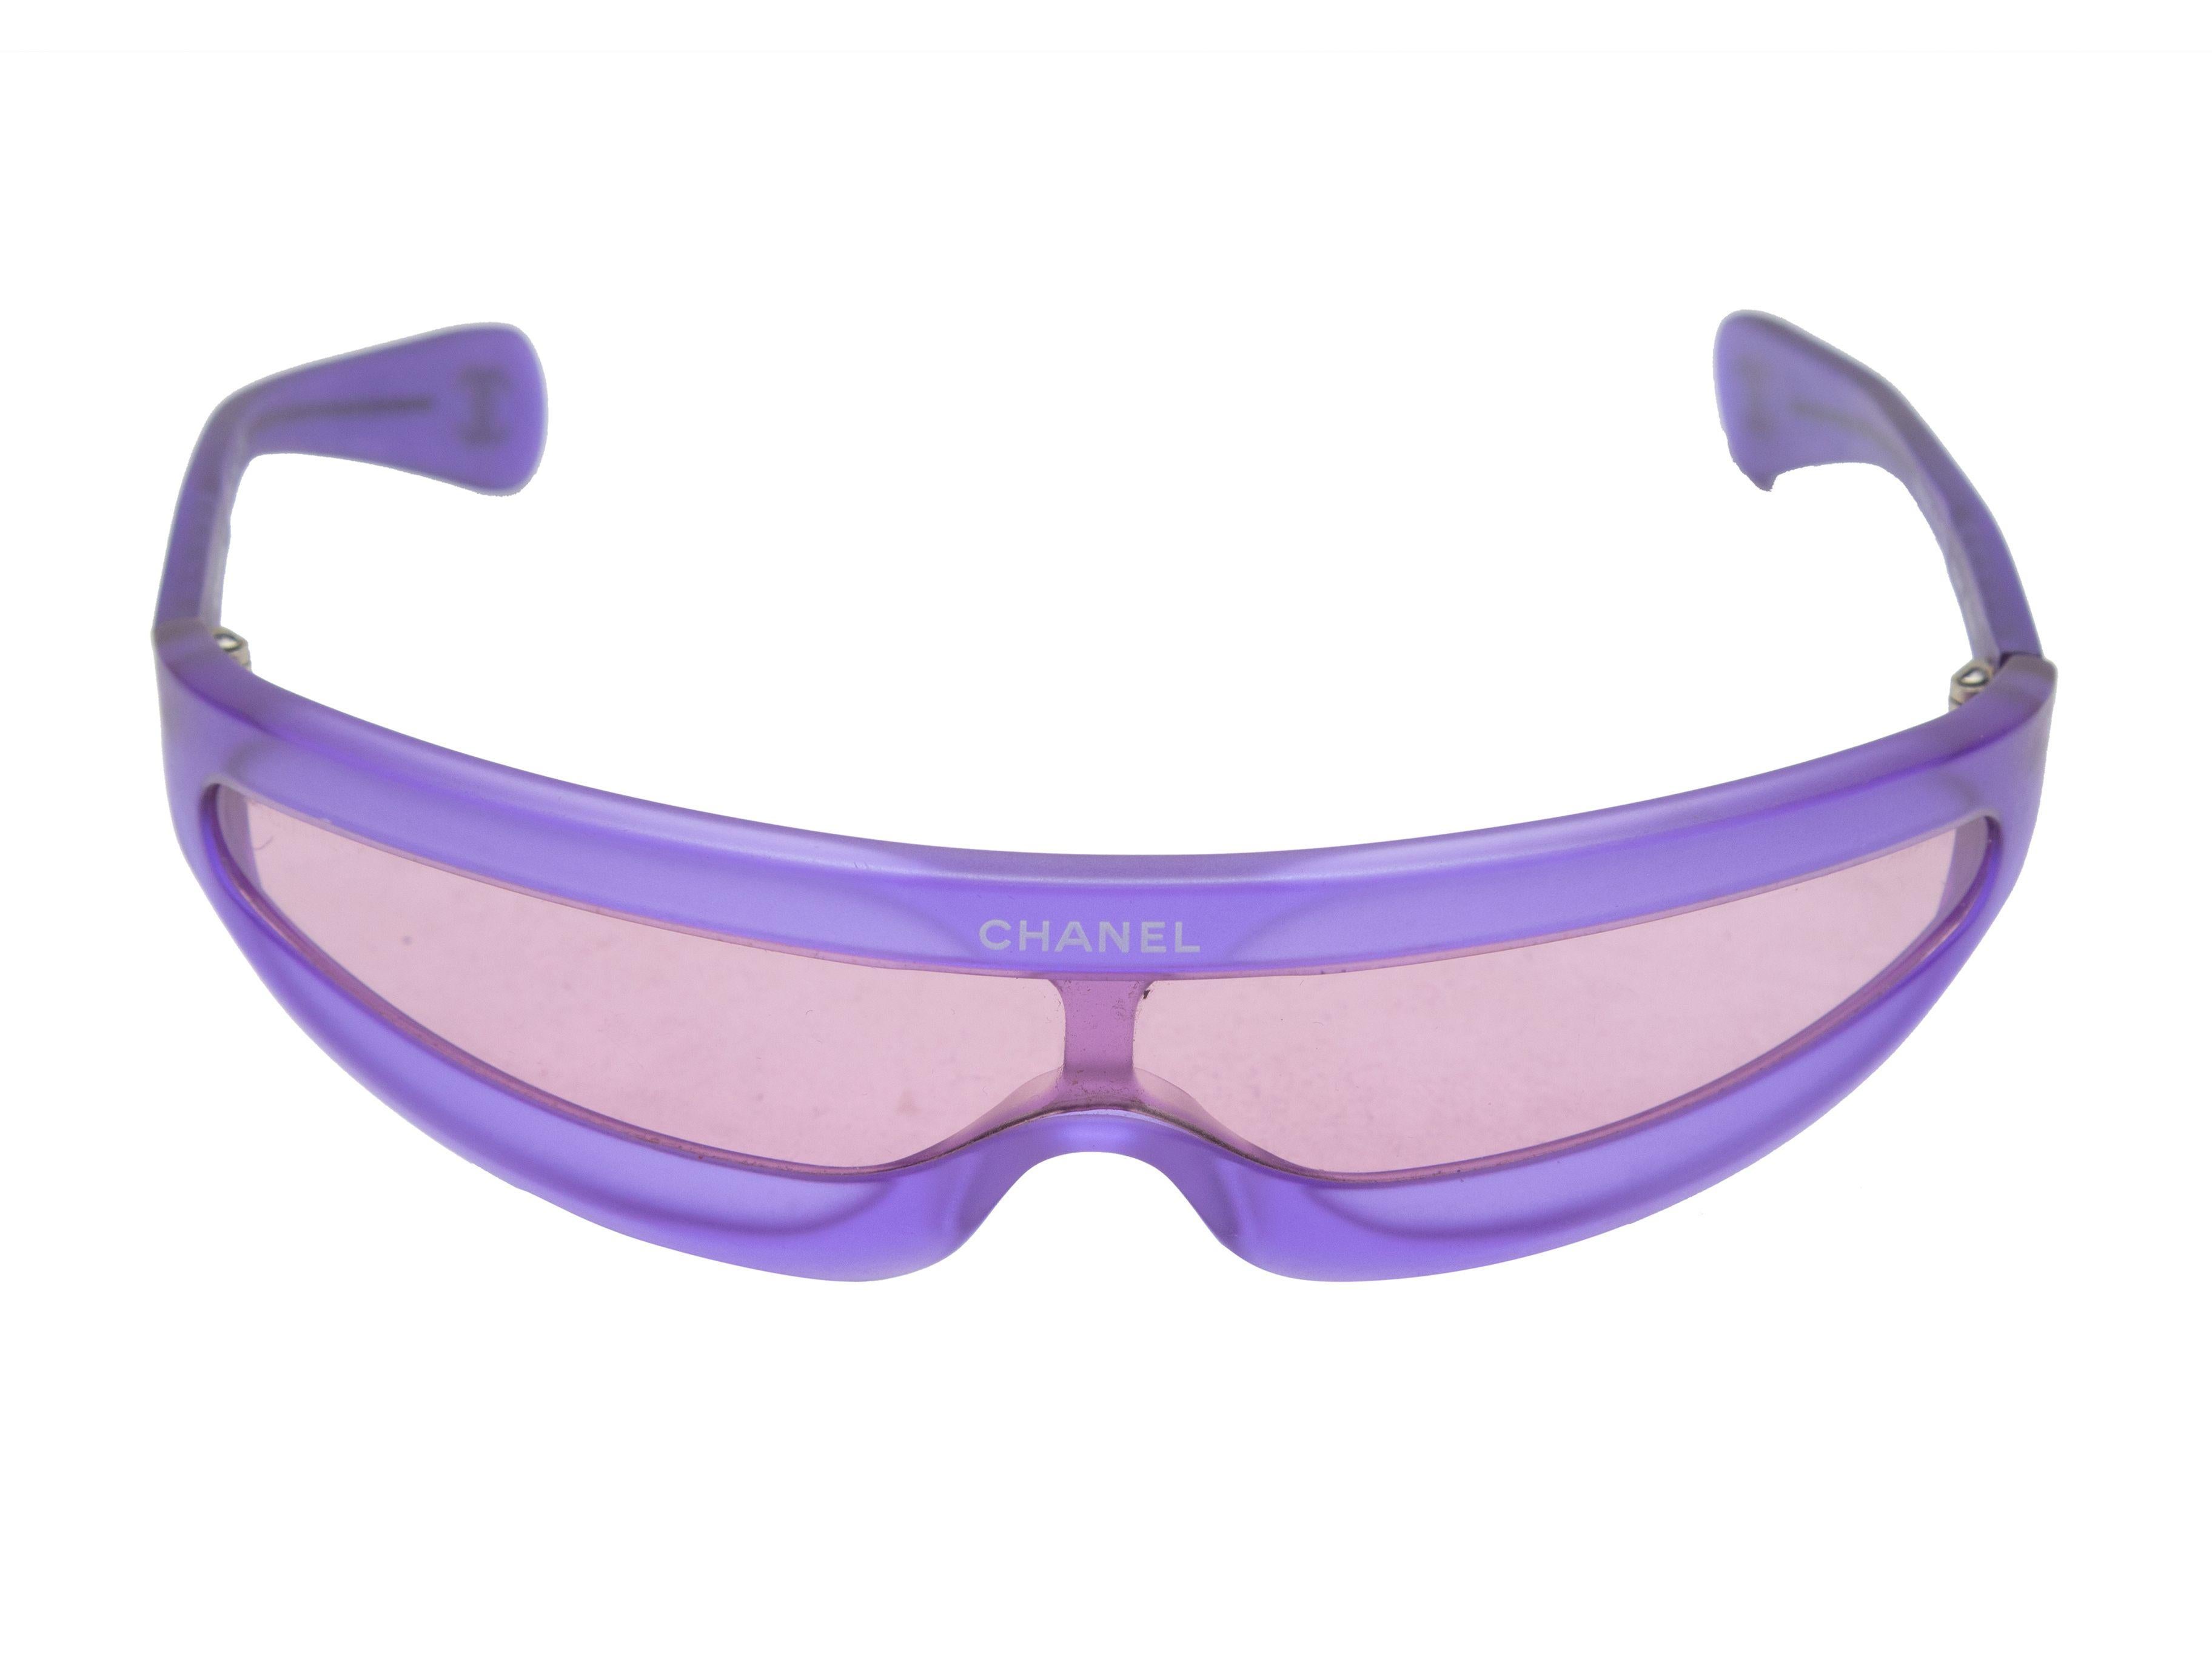 Product Details: purple acetate thin shield sunglasses by Chanel. From the Spring/Summer 2001 Collection. Purple tinted lenses. 1.75